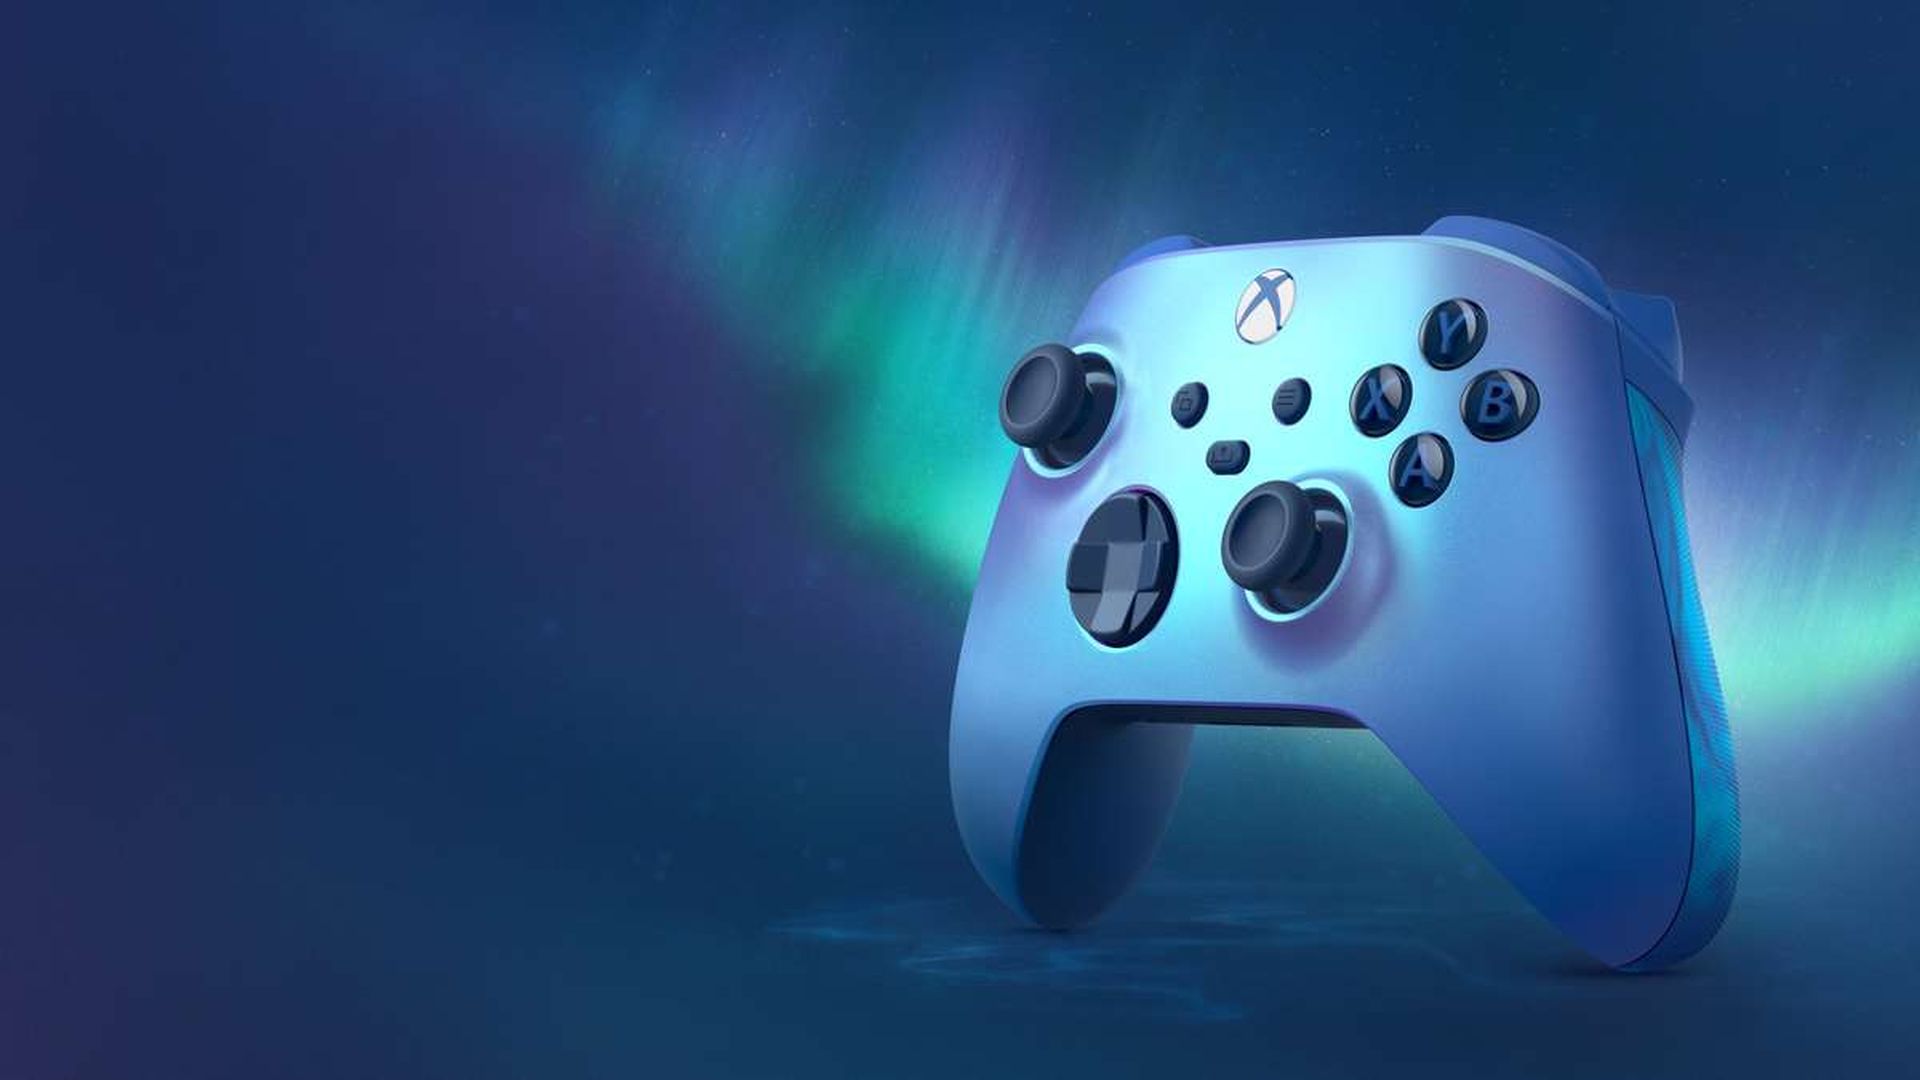 Best Xbox Series X controller 2022 – get a top pad for Xbox gaming this year